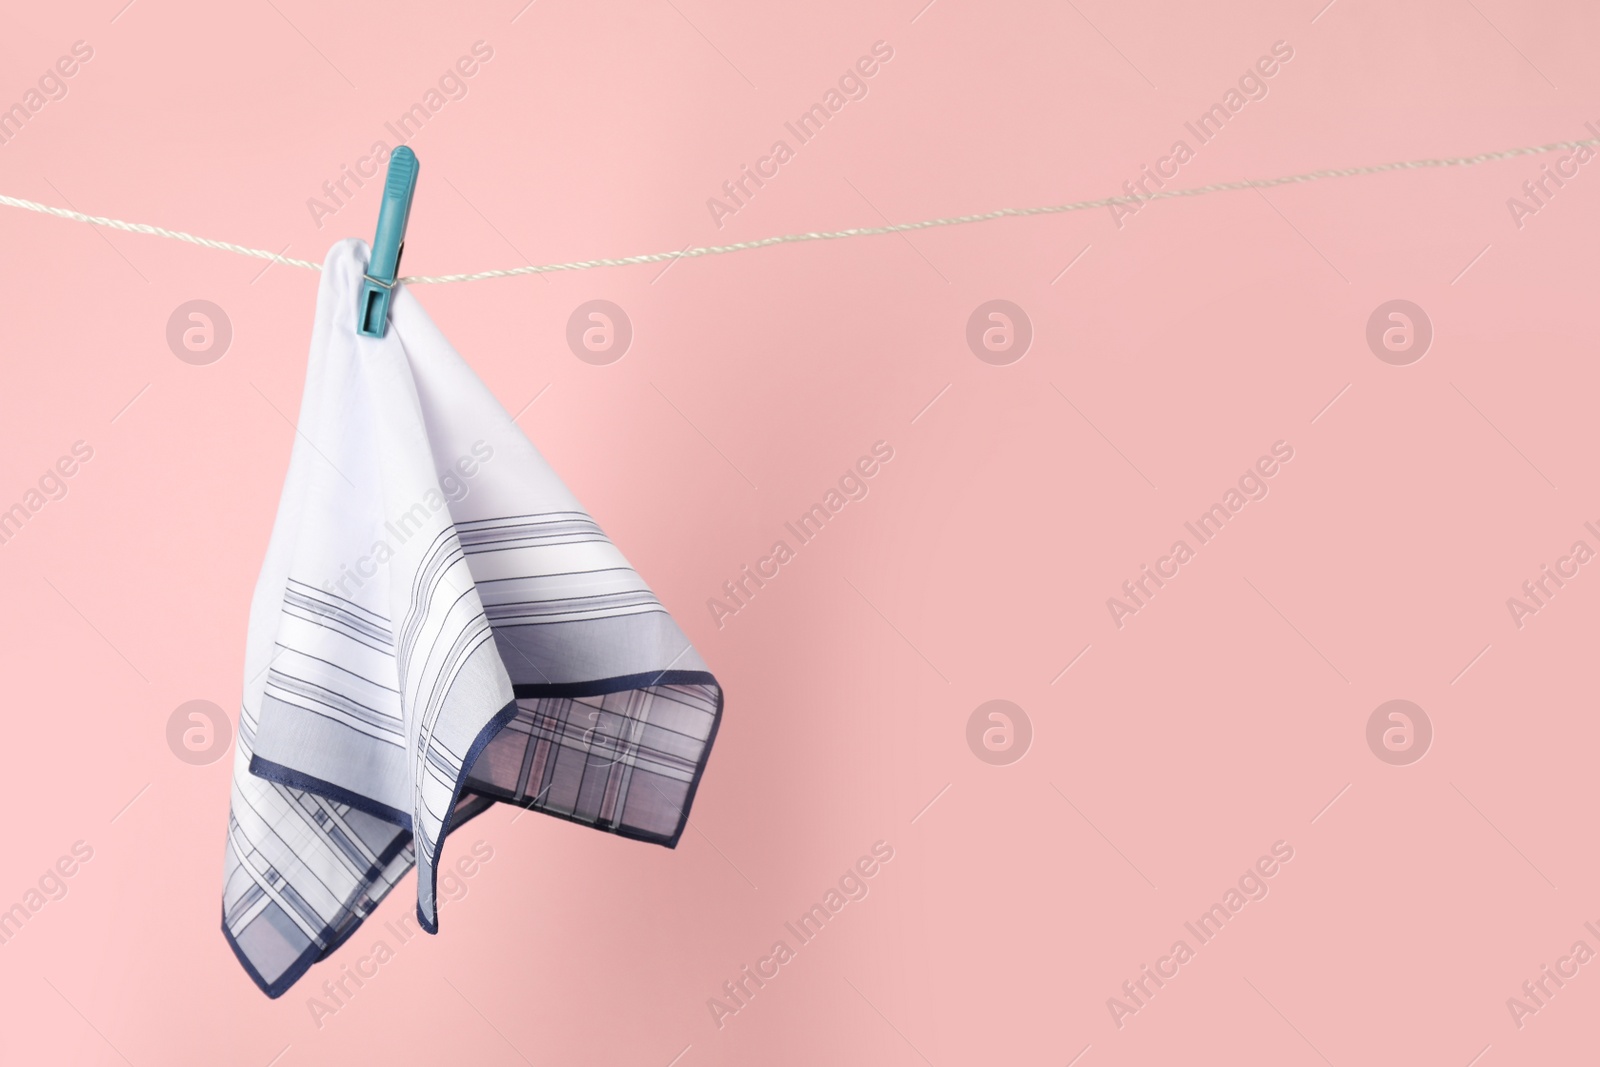 Photo of Handkerchief hanging on rope against pink background, space for text